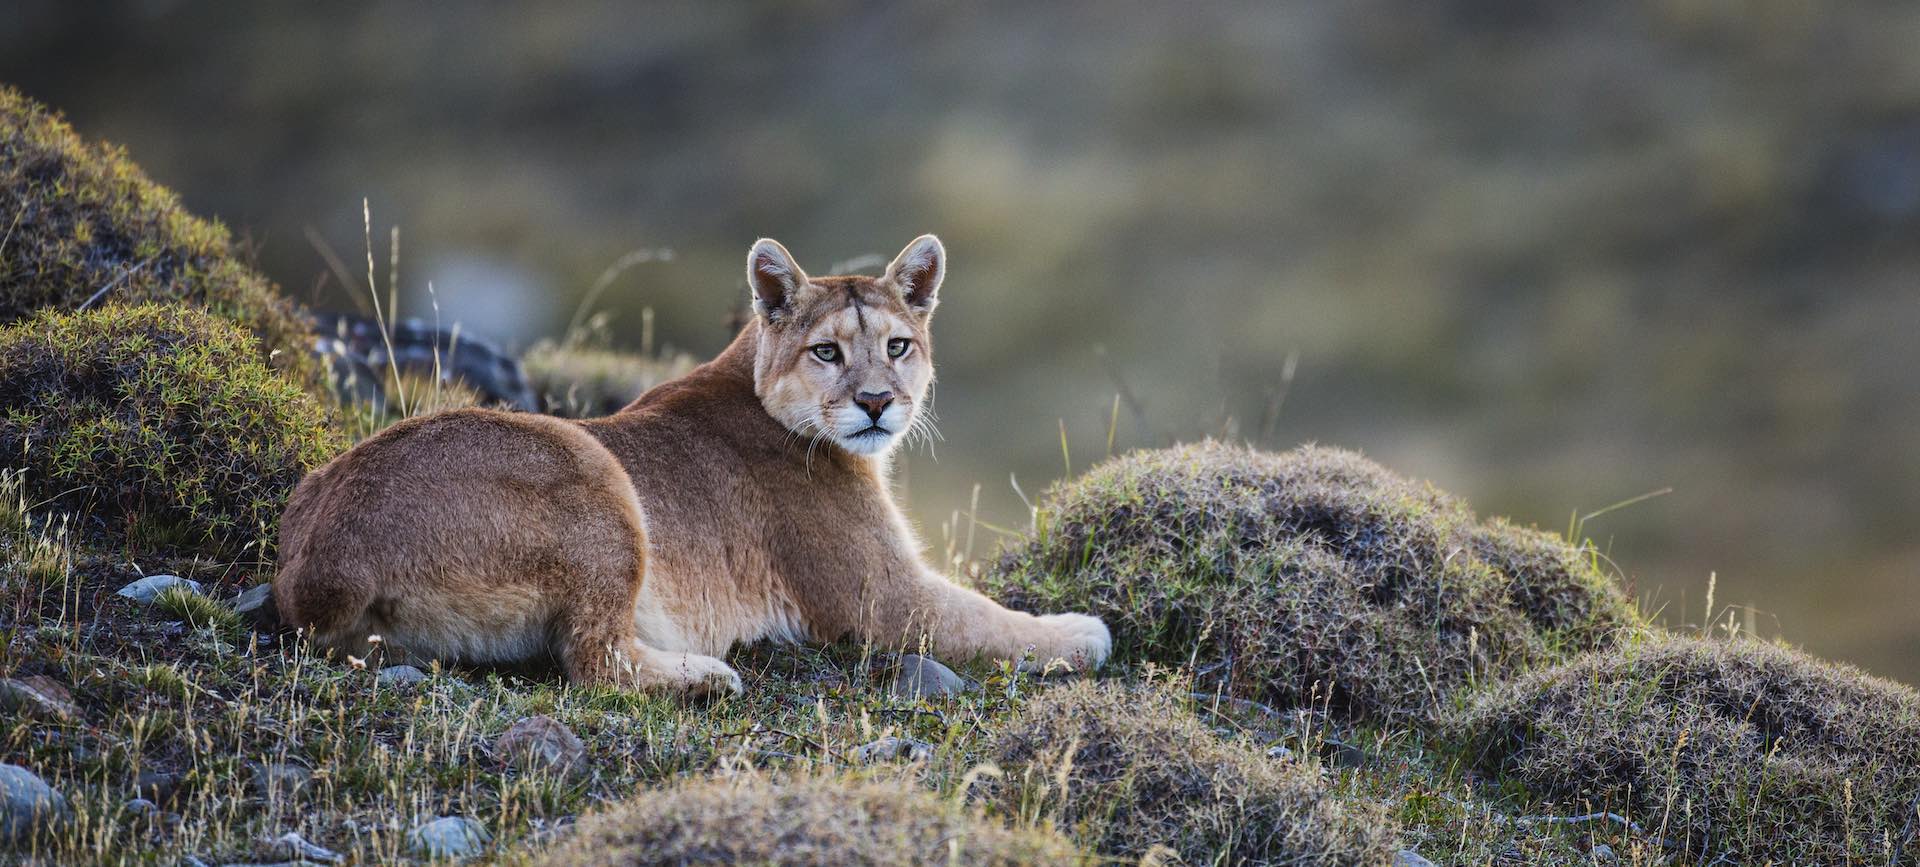 A puma laying in tuft grass